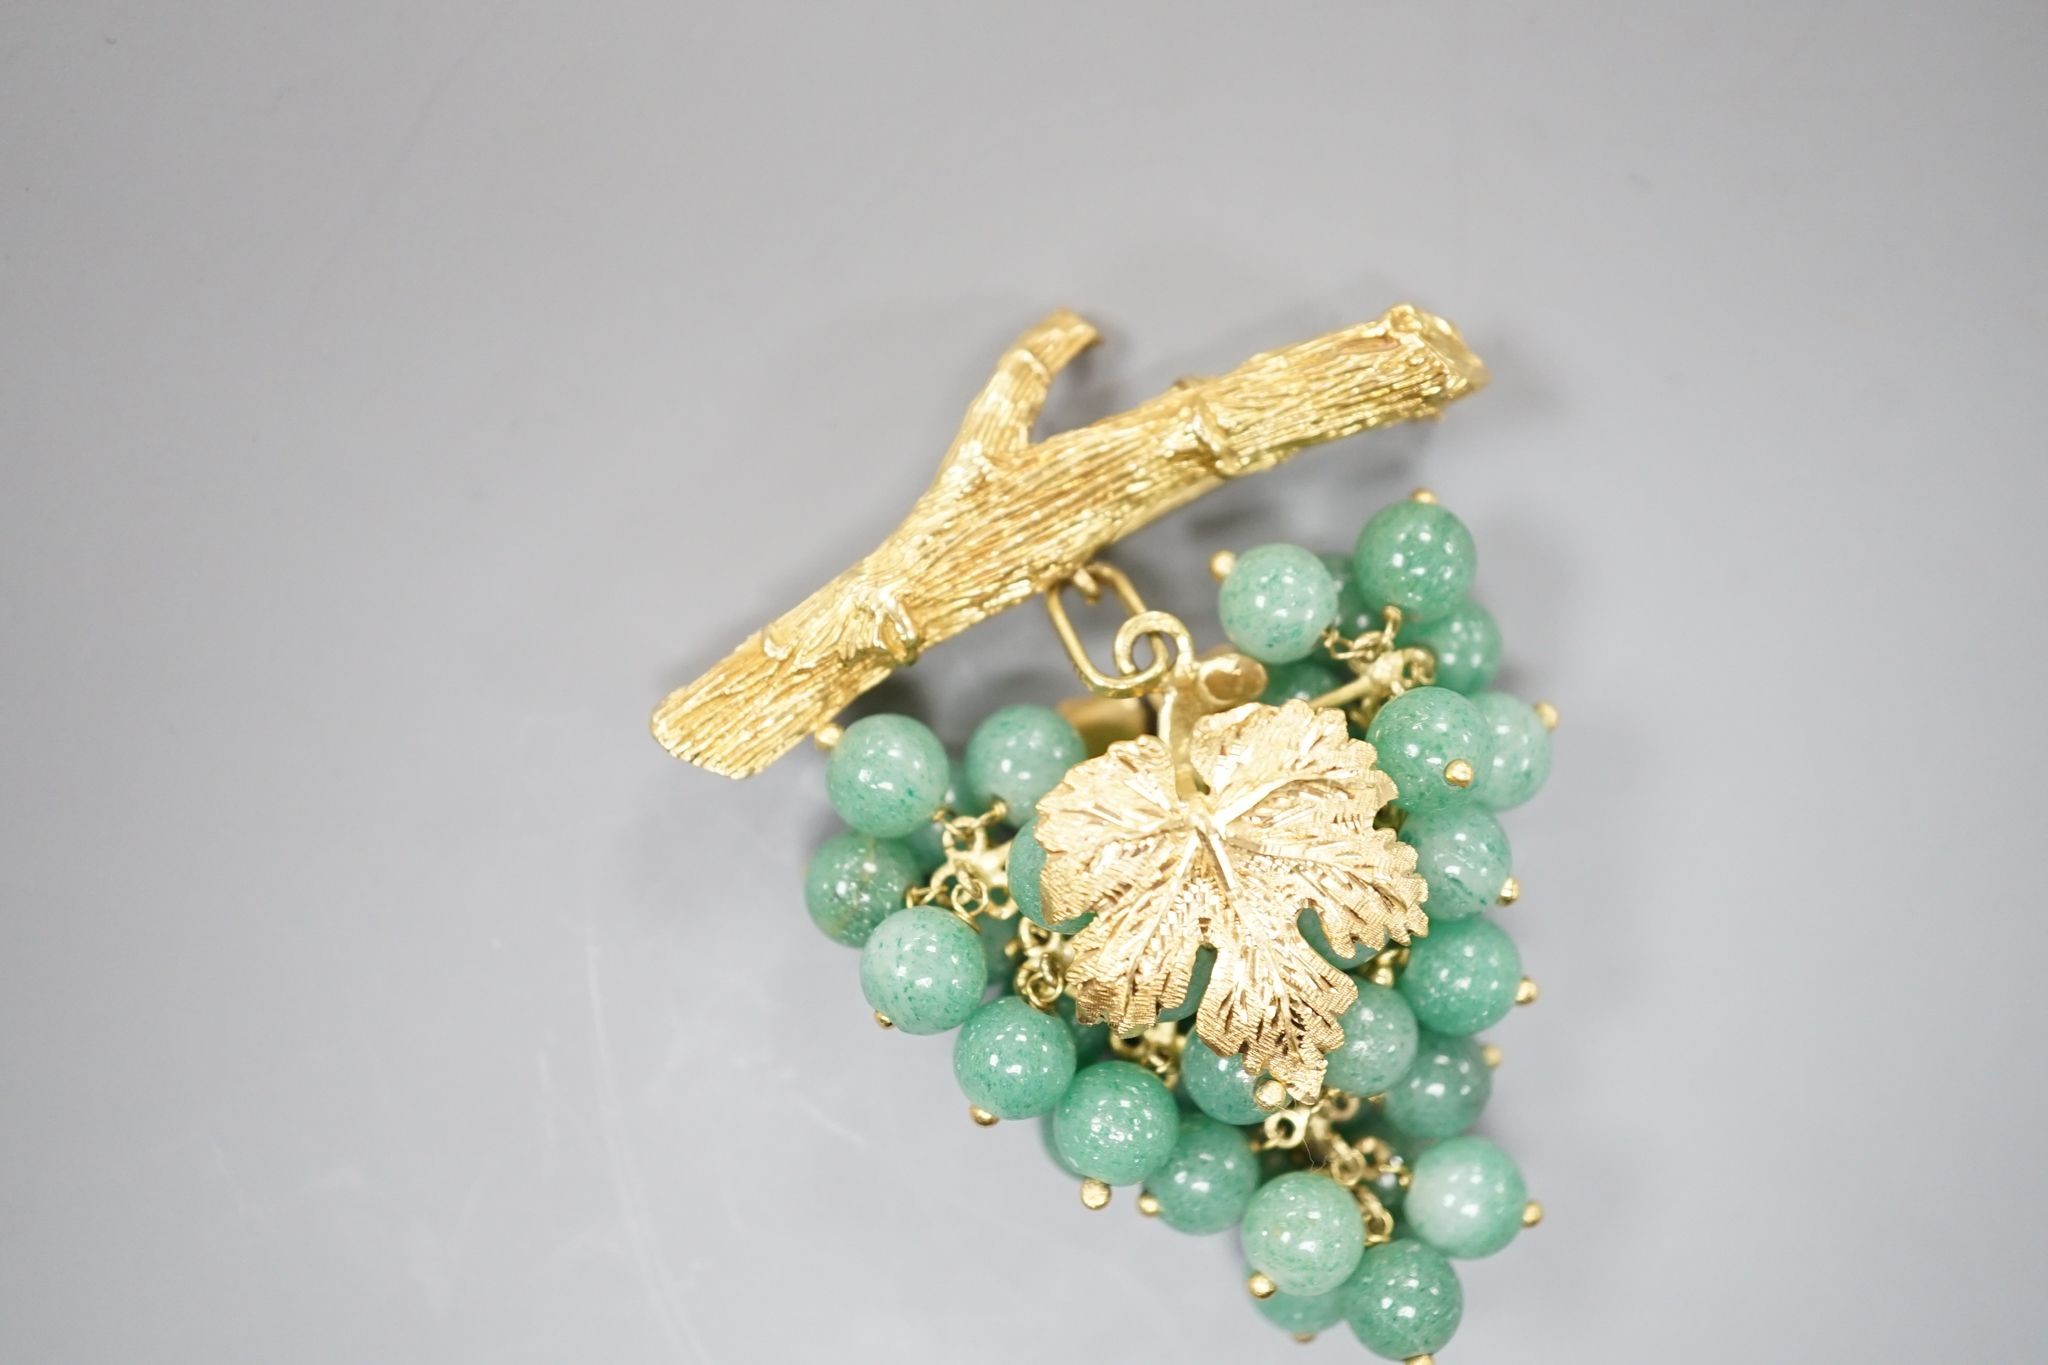 A 20th century continental 18k yellow metal and adventurine quartz bead set brooch, modelled as a bunch of grapes hanging from a branch, 59mm, gross weight 30.4 grams.